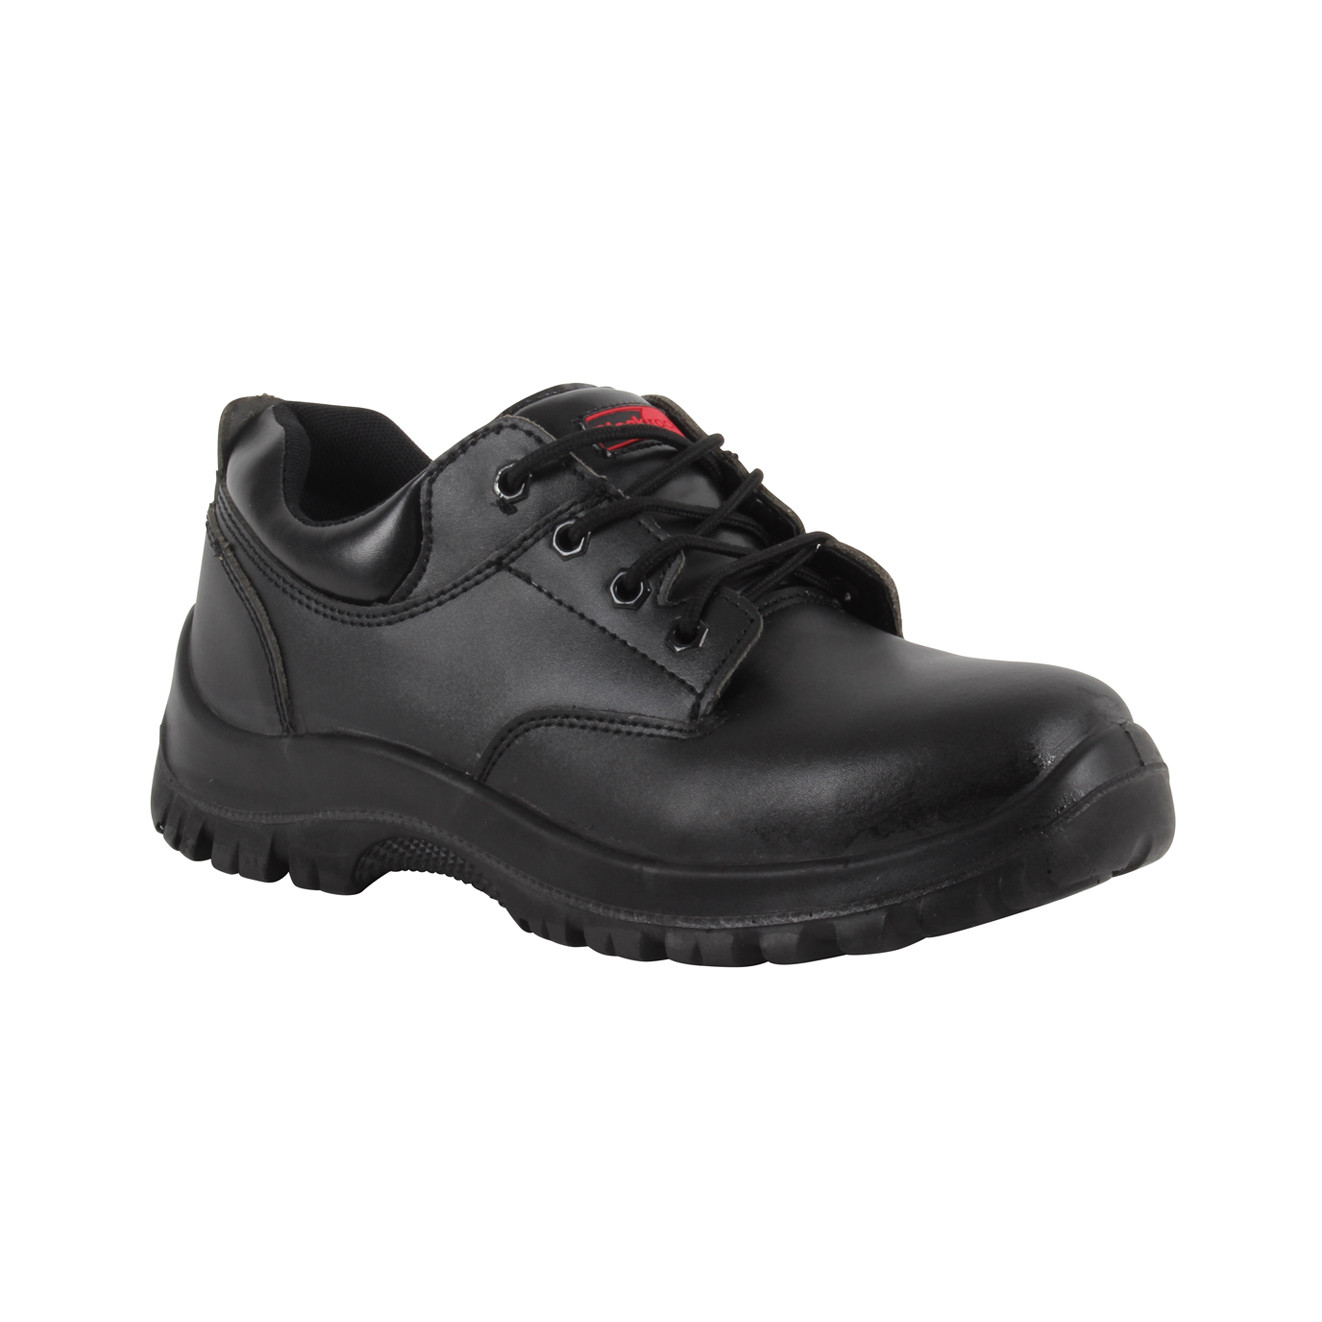 Ultimate Safety Shoe